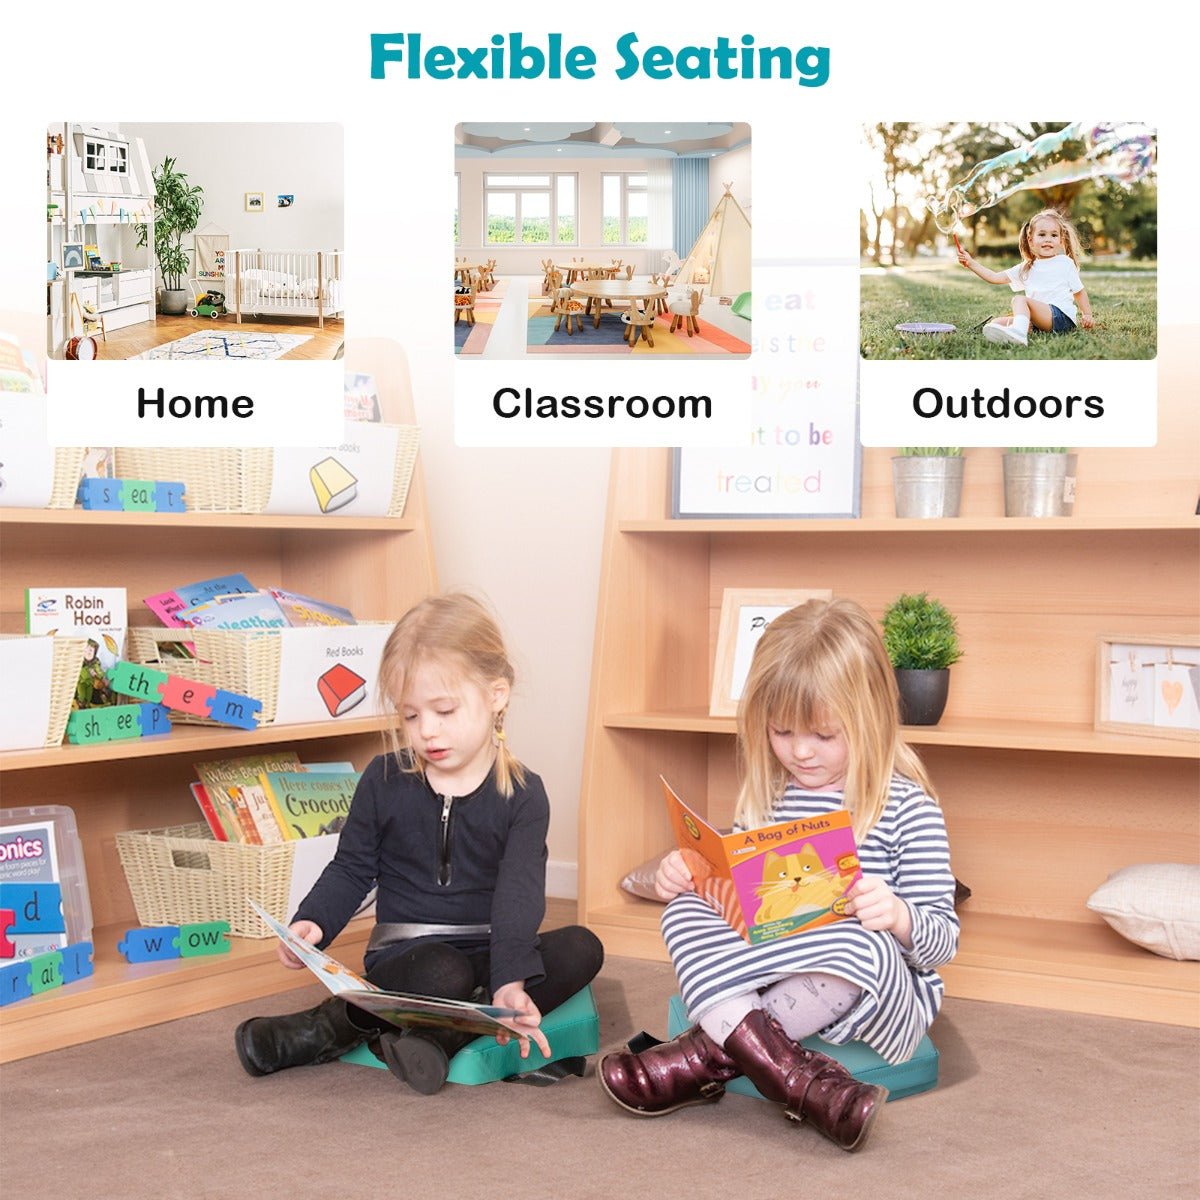 Classroom Comfort - 6-Piece Kids Floor Cushion Set with Soft Seating